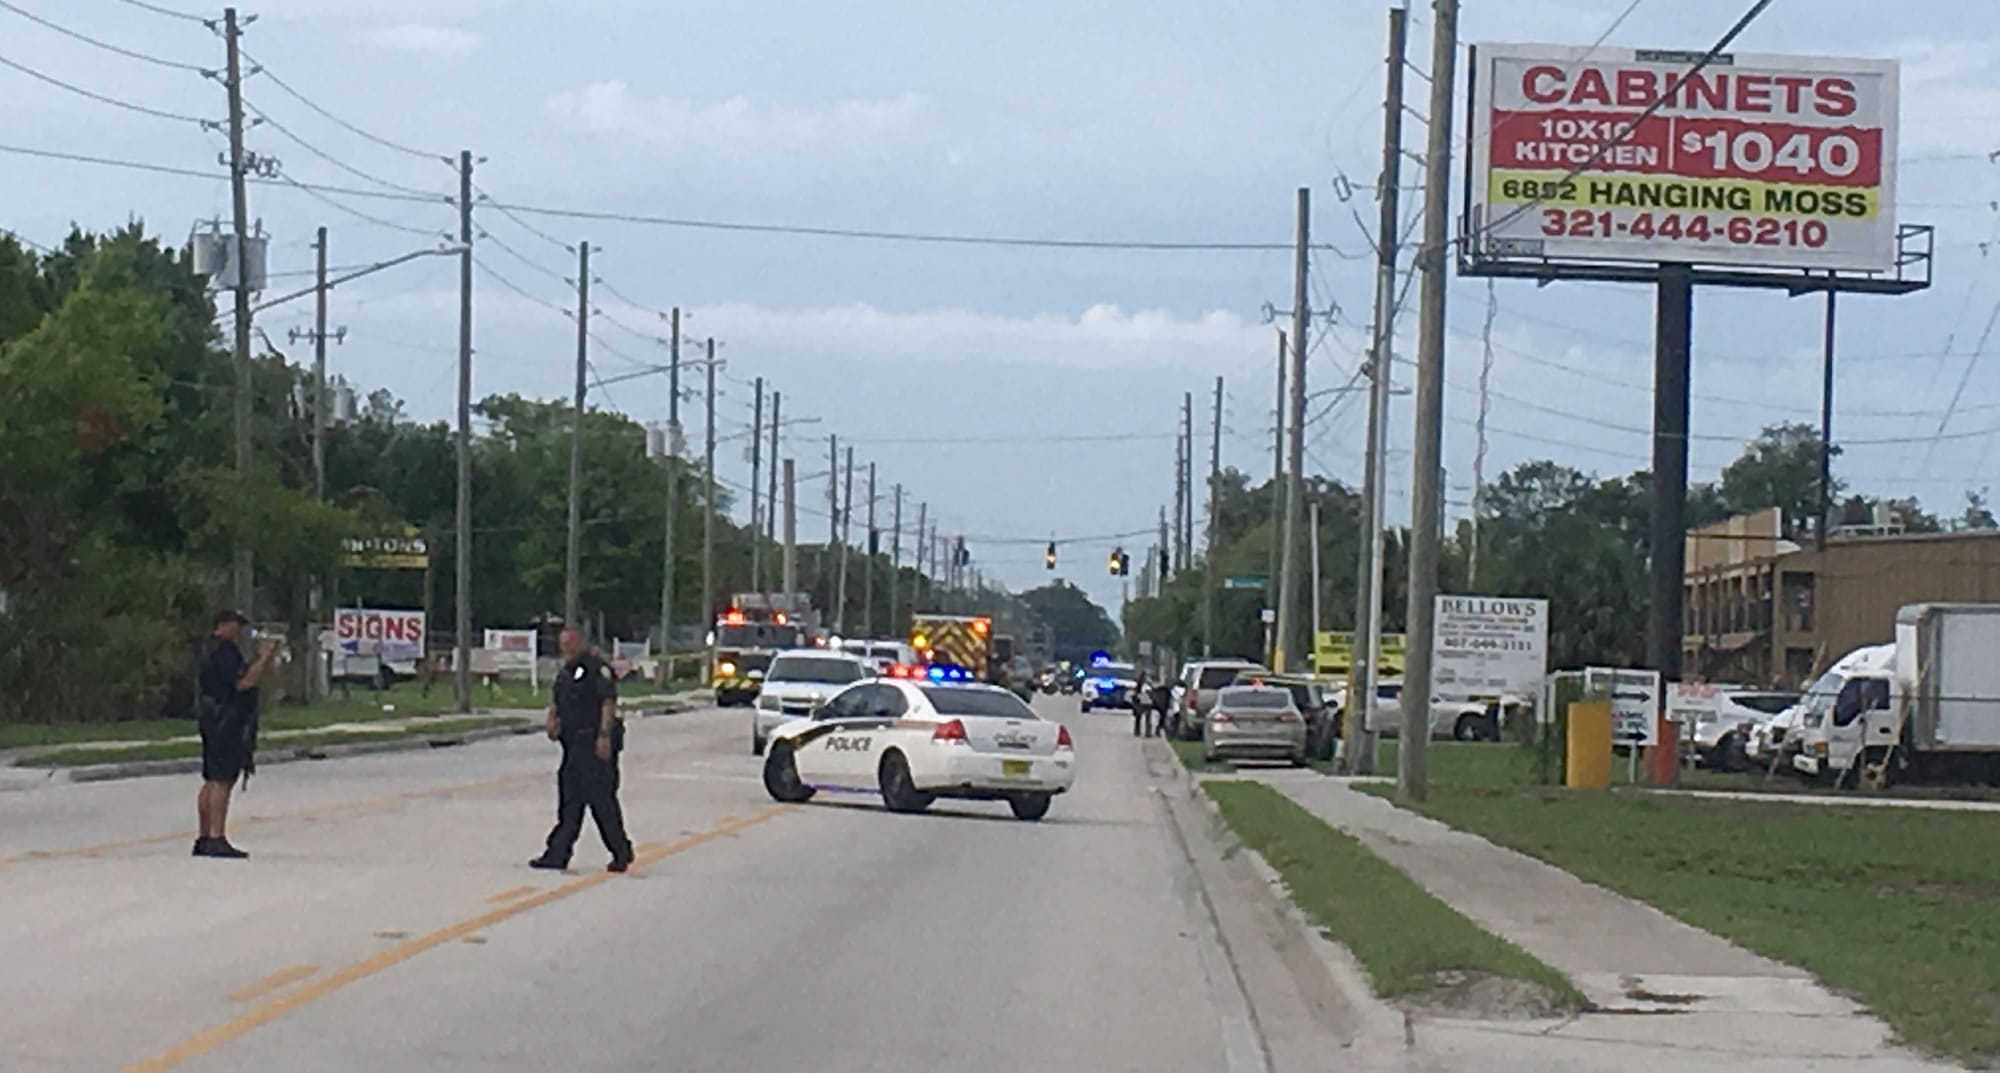 Police work near the scene of a shooting where they said there were multiple fatalities in an industrial area near Orlando, Fla., Monday, June 5, 2017. The Orange County Sheriff's Office said on its official Twitter account that the situation has been contained.